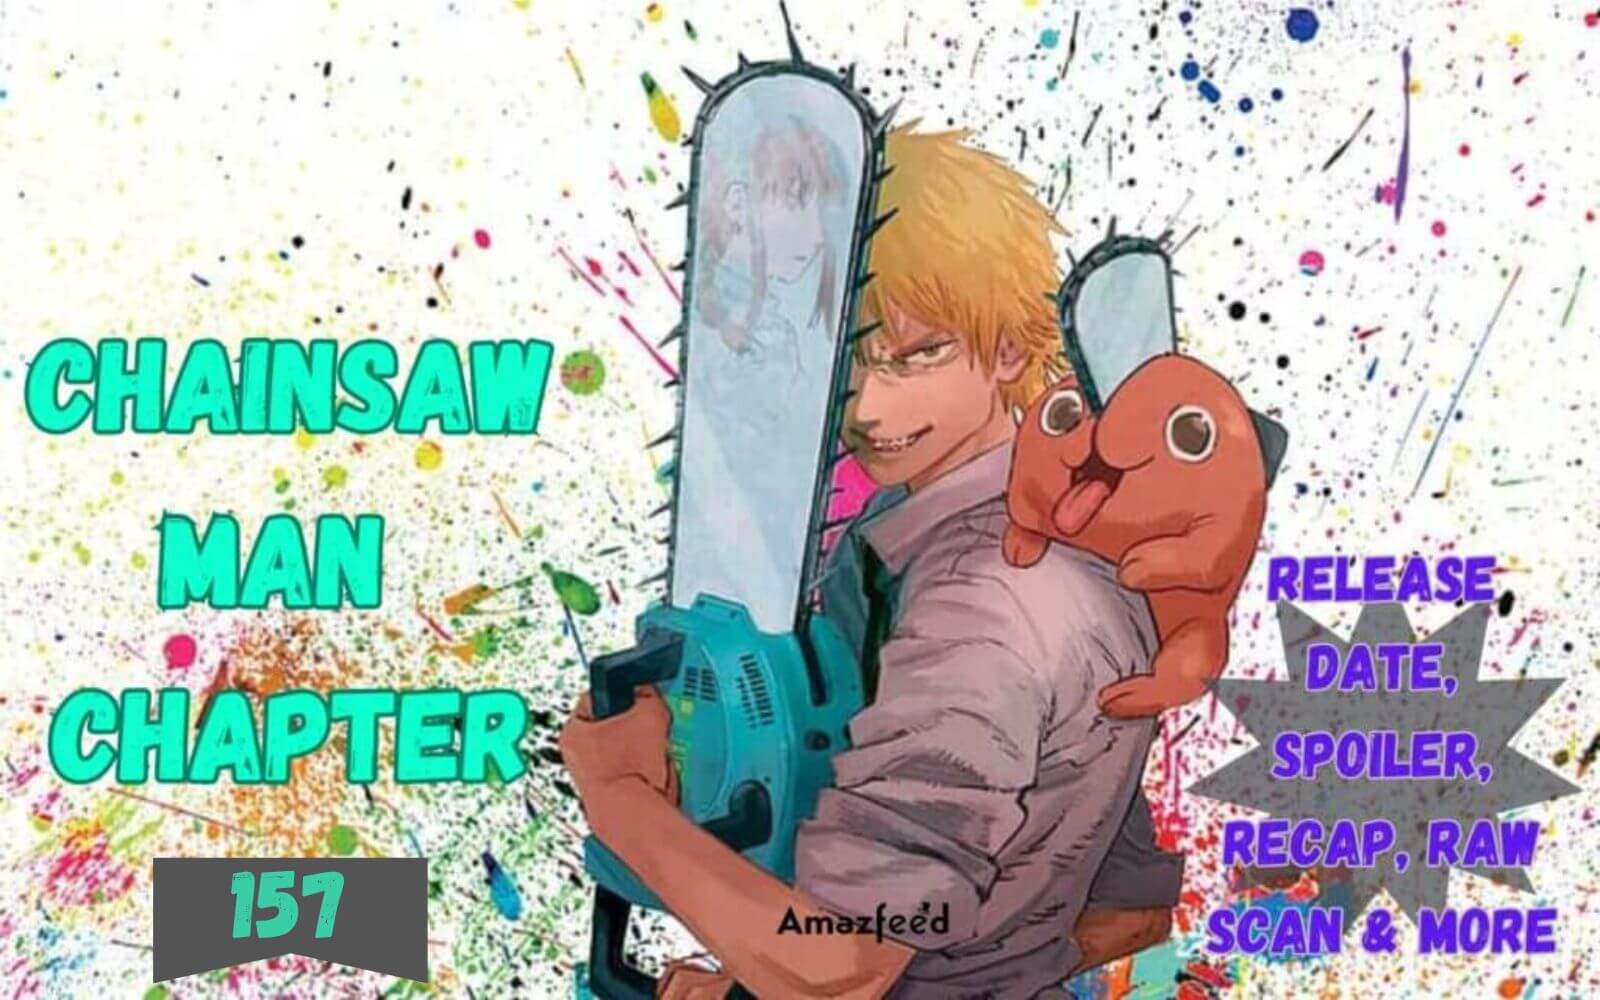 Chainsaw Man Chapter 157 Spoiler